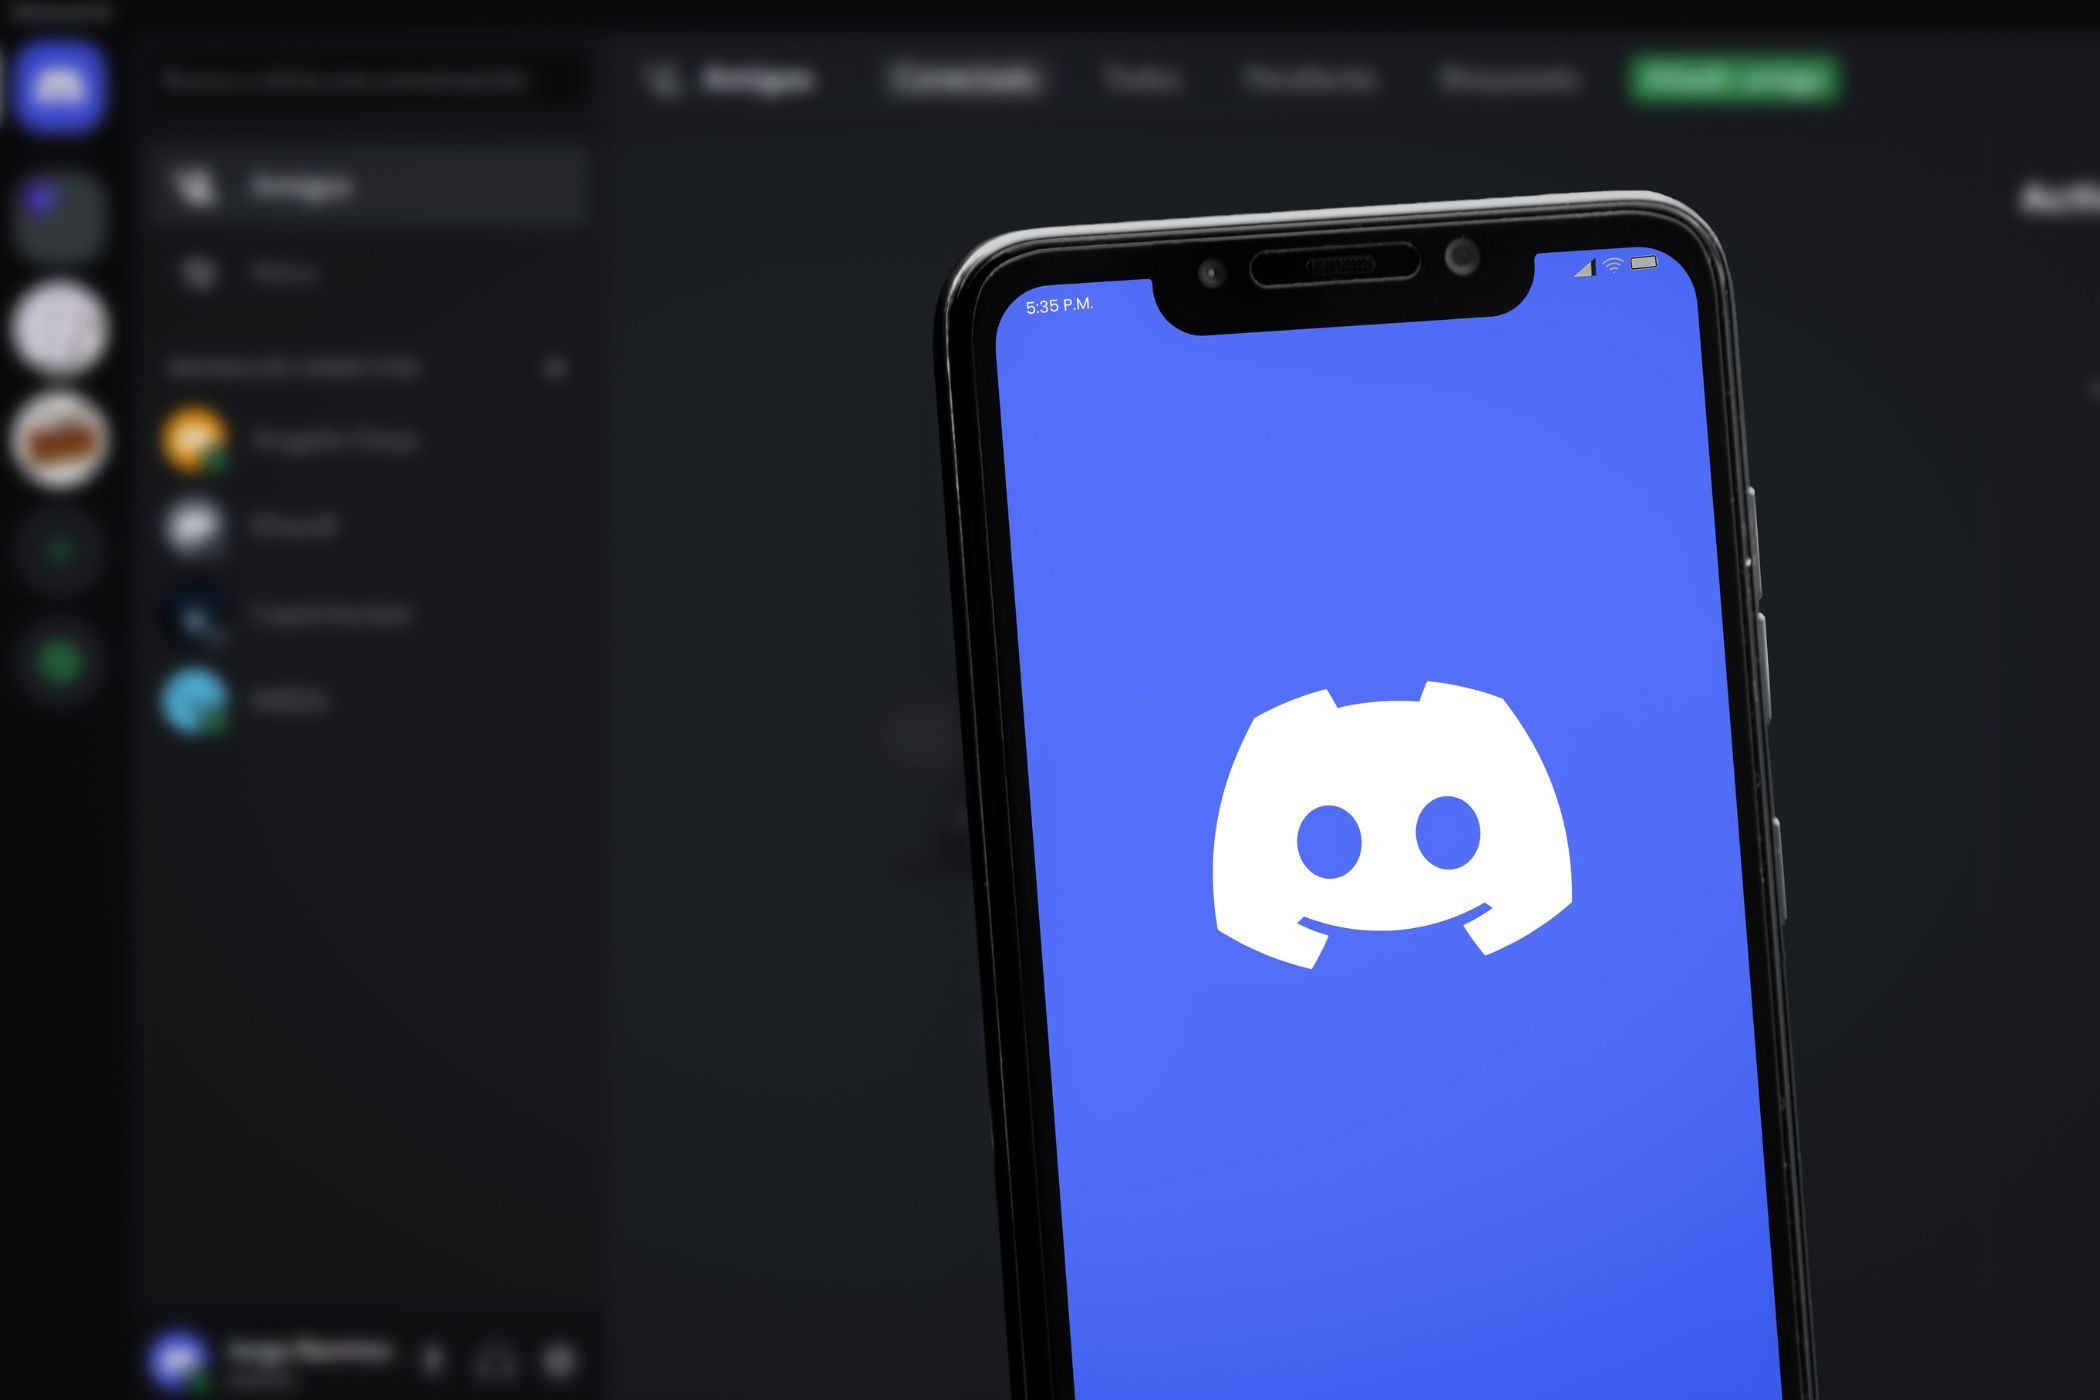 discord logo on a smartphone in front of a screen displaying the discord app